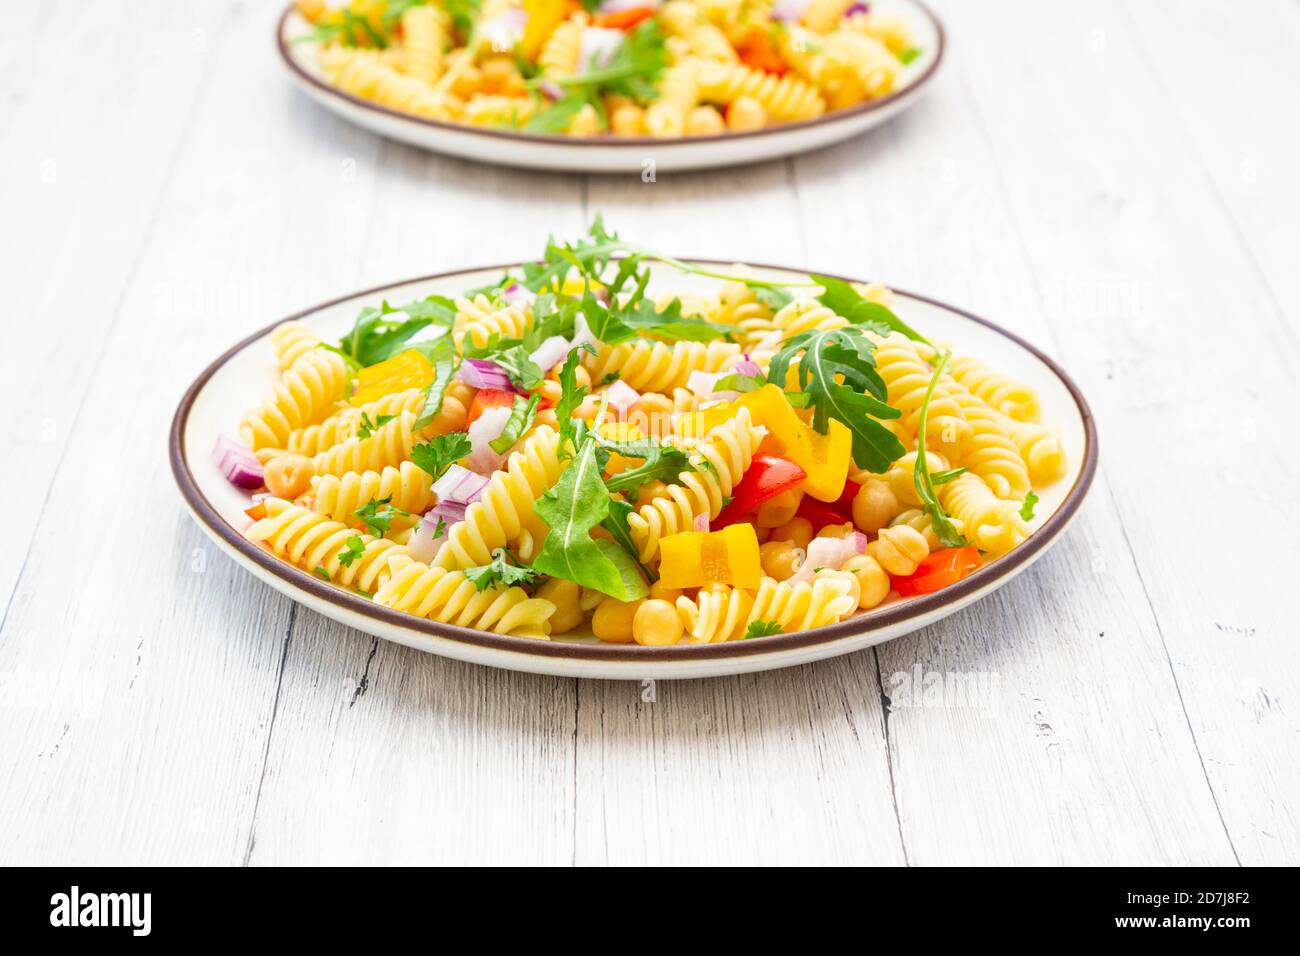 Plate of vegetarian pasta salad with chick-peas, bell pepper, arugula, onion, parsley and basil Stock Photo